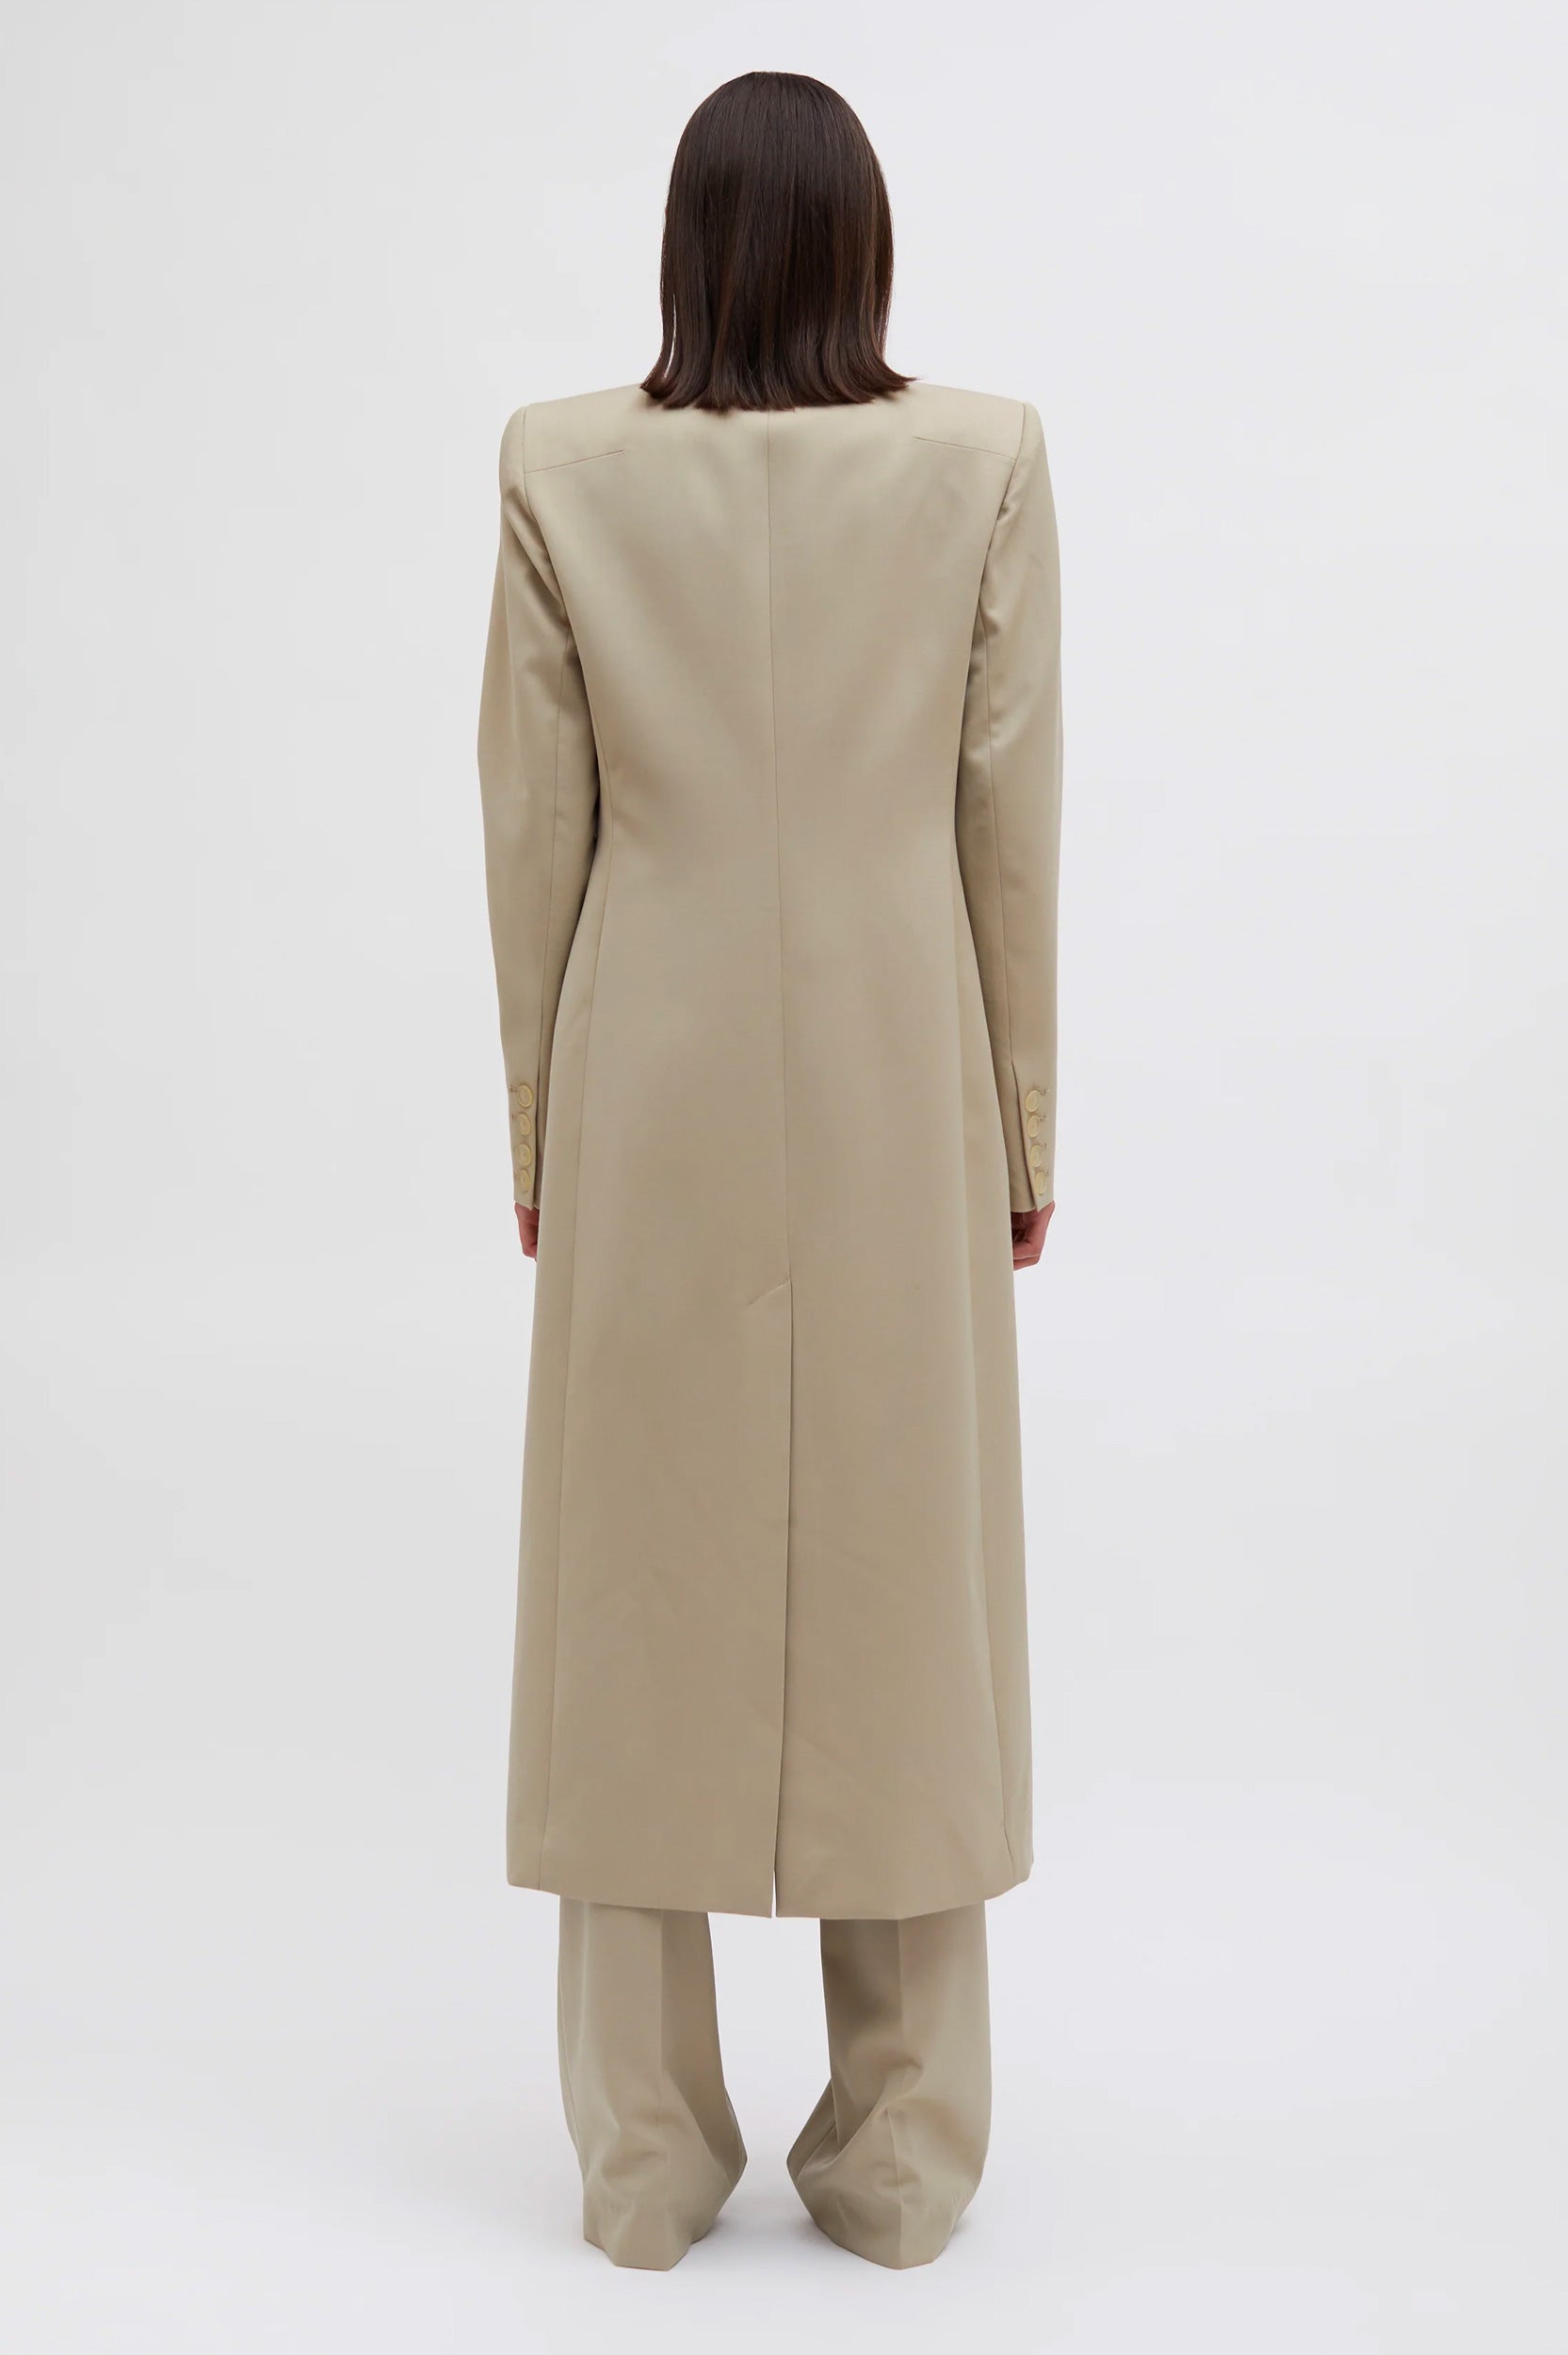 Talus Tailored Coat in Taupe